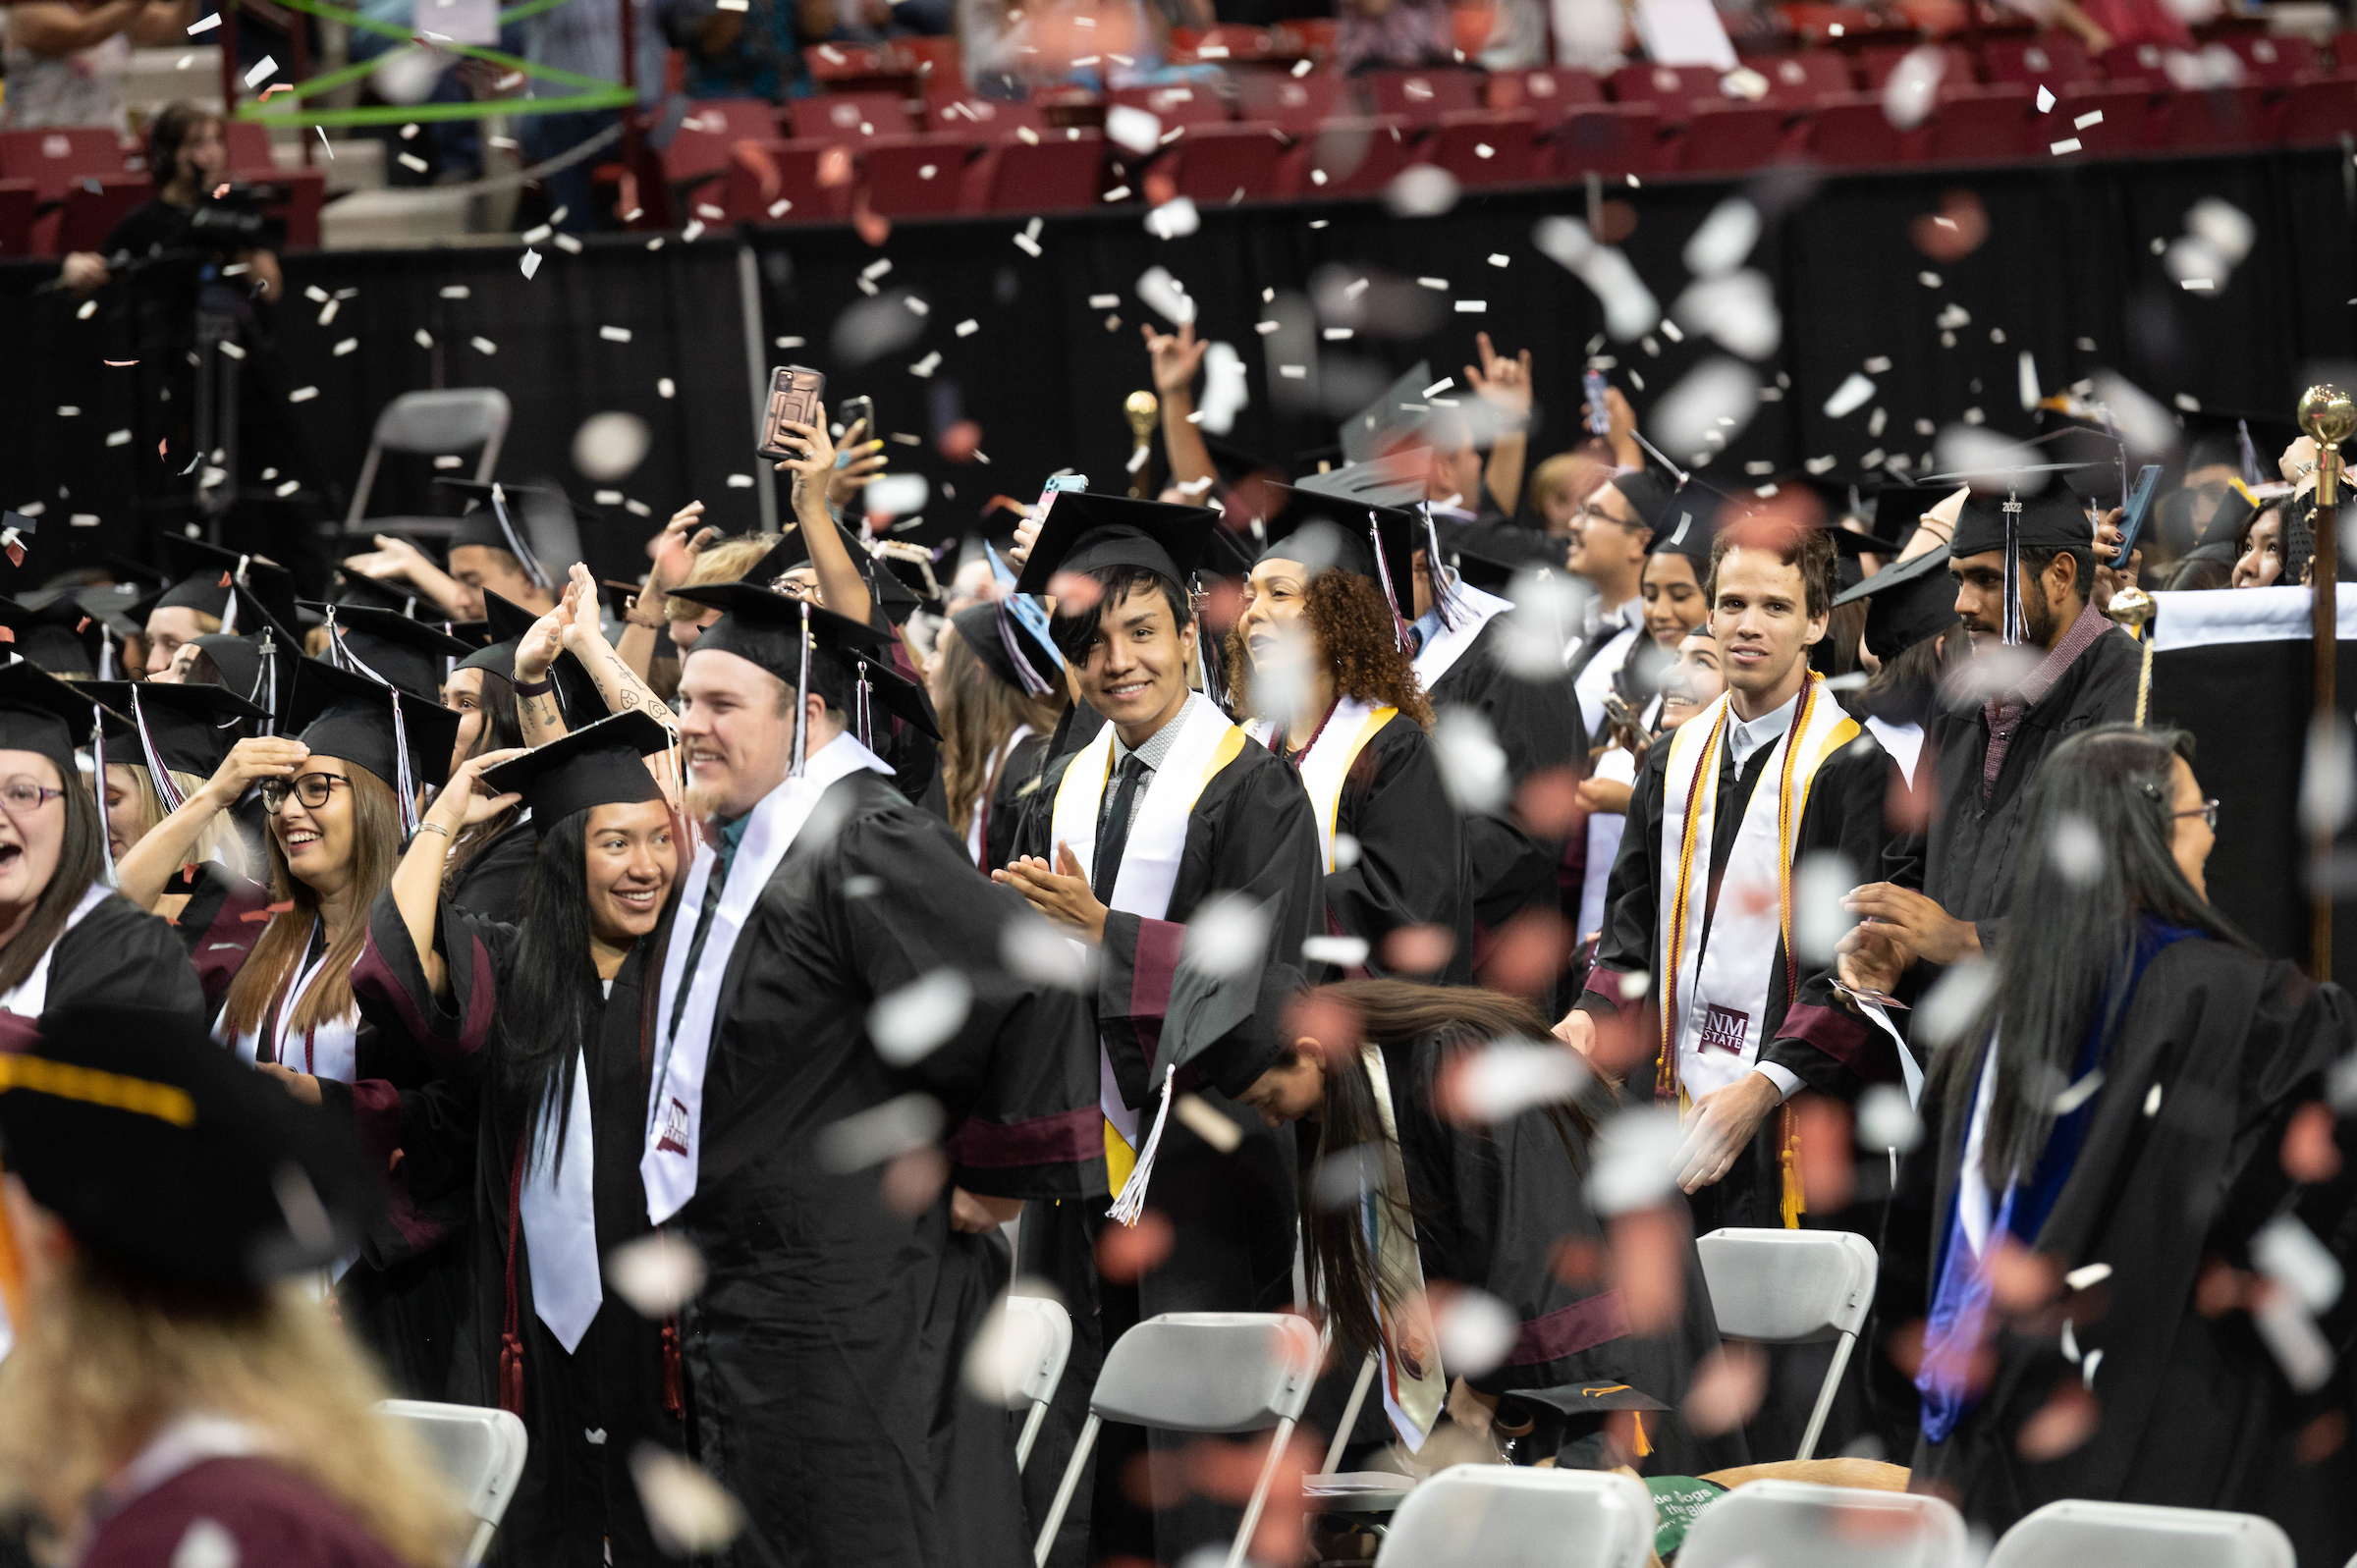 Men and women stand and celebrate as confetti flies at a commencement ceremony. 